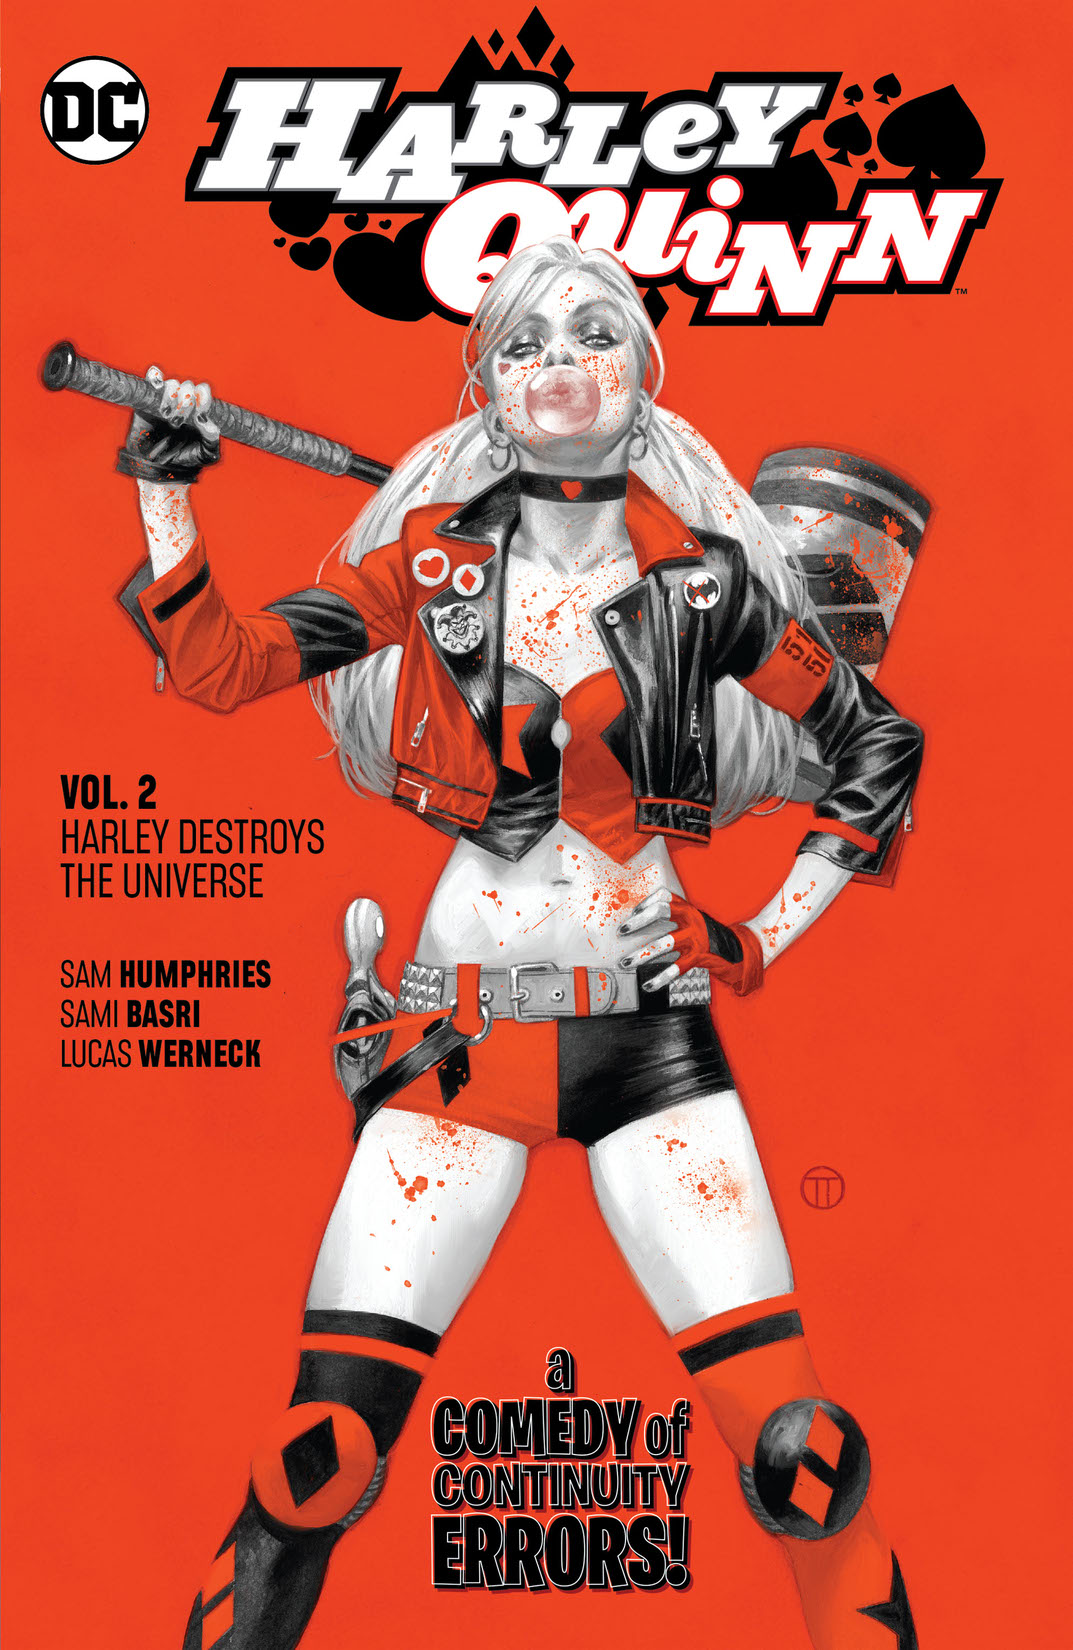 Harley Quinn Vol. 2: Harley Destroys the Universe preview images